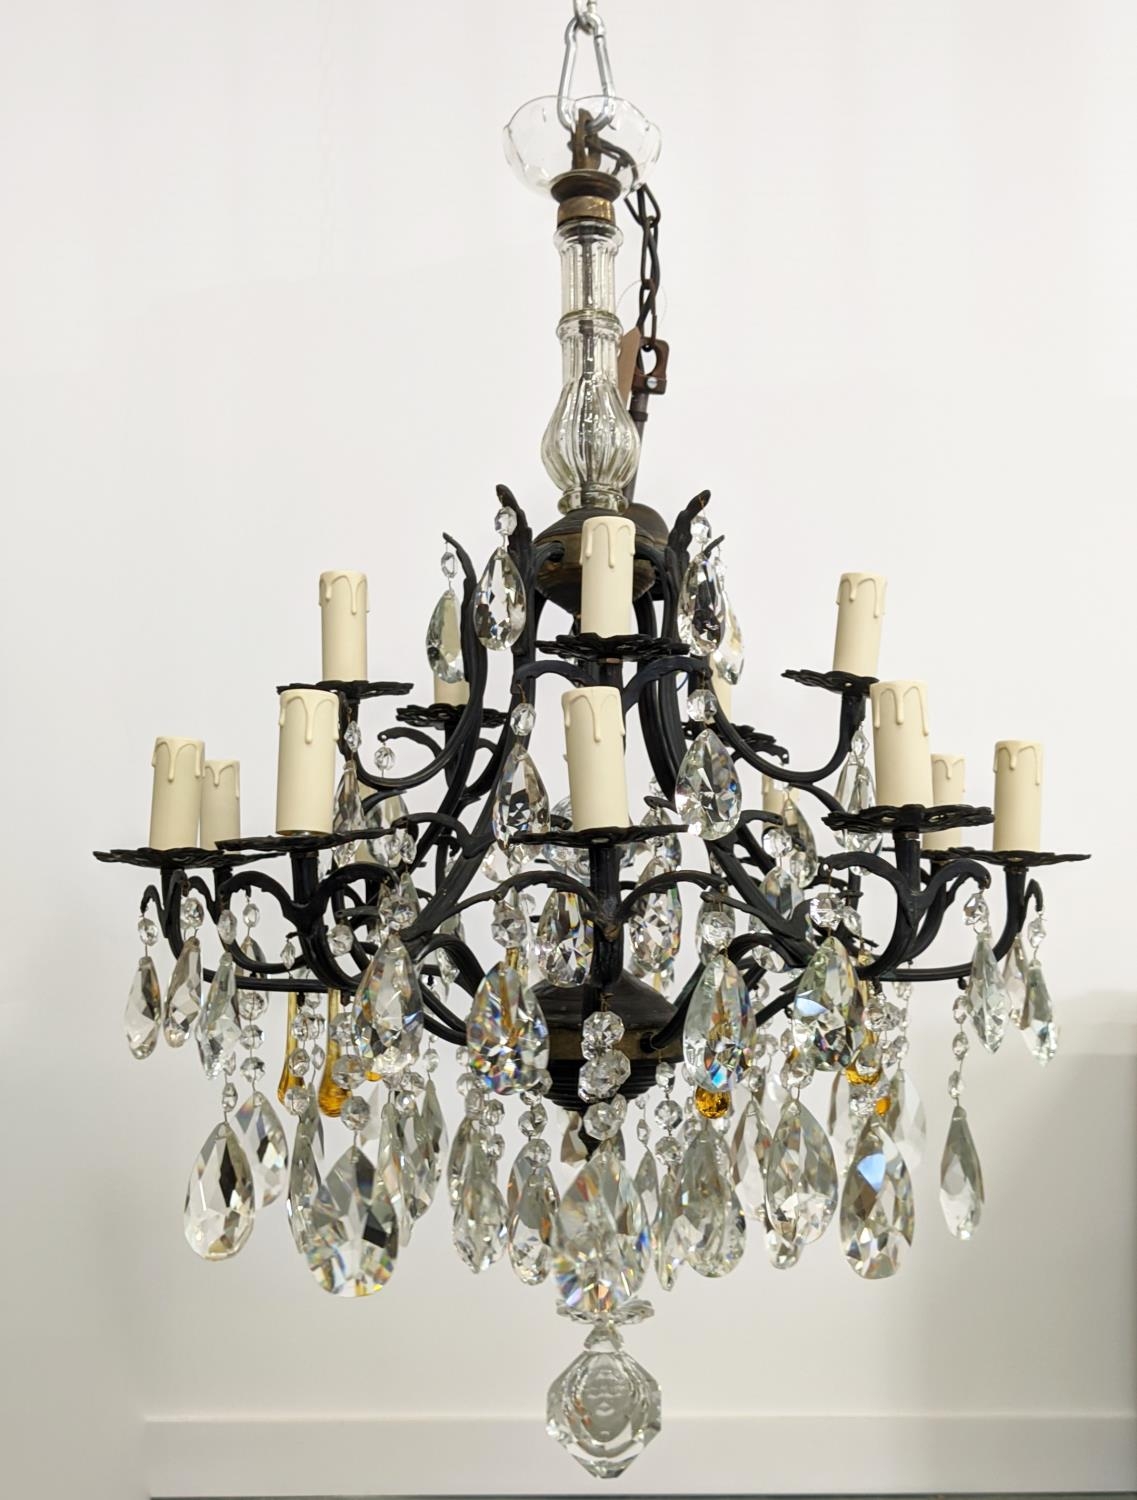 CHANDELIER, patinated metal with clear and amber glass drops from fifteen lights, 60cm W x 114cm - Image 3 of 18